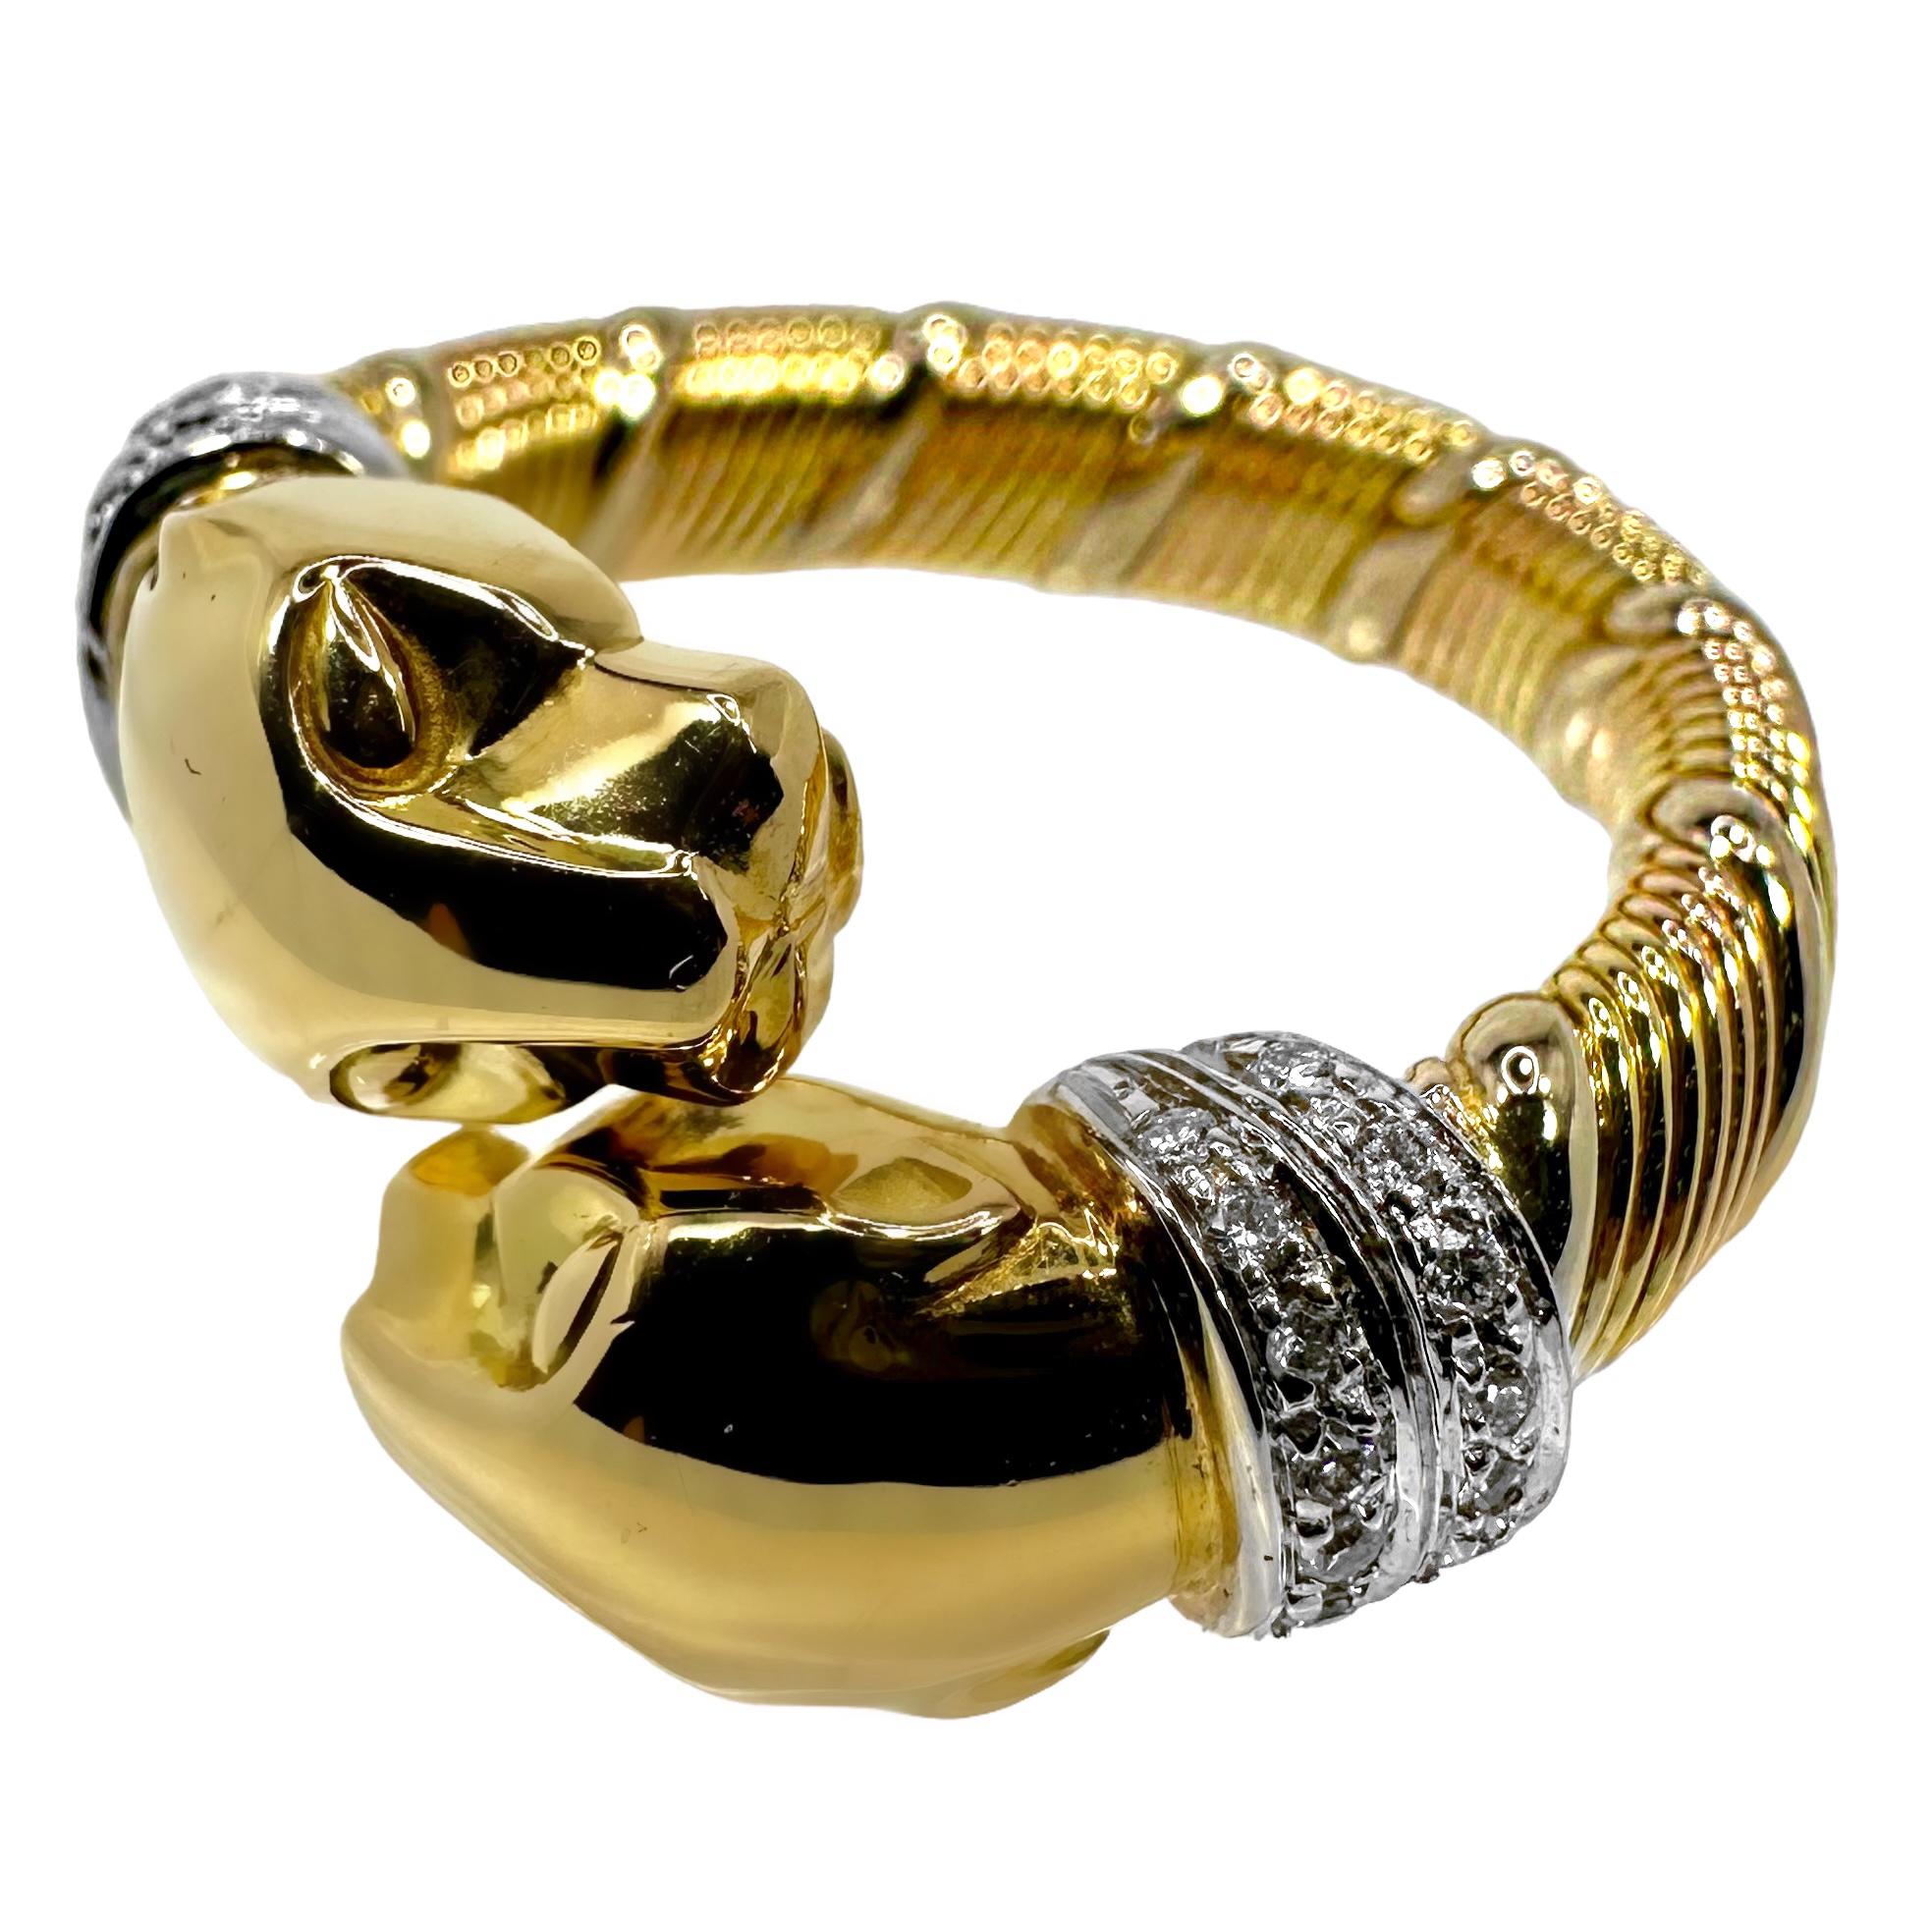 Women's Iconic Cartier Panthere Bypass Ring in Gold and Diamonds